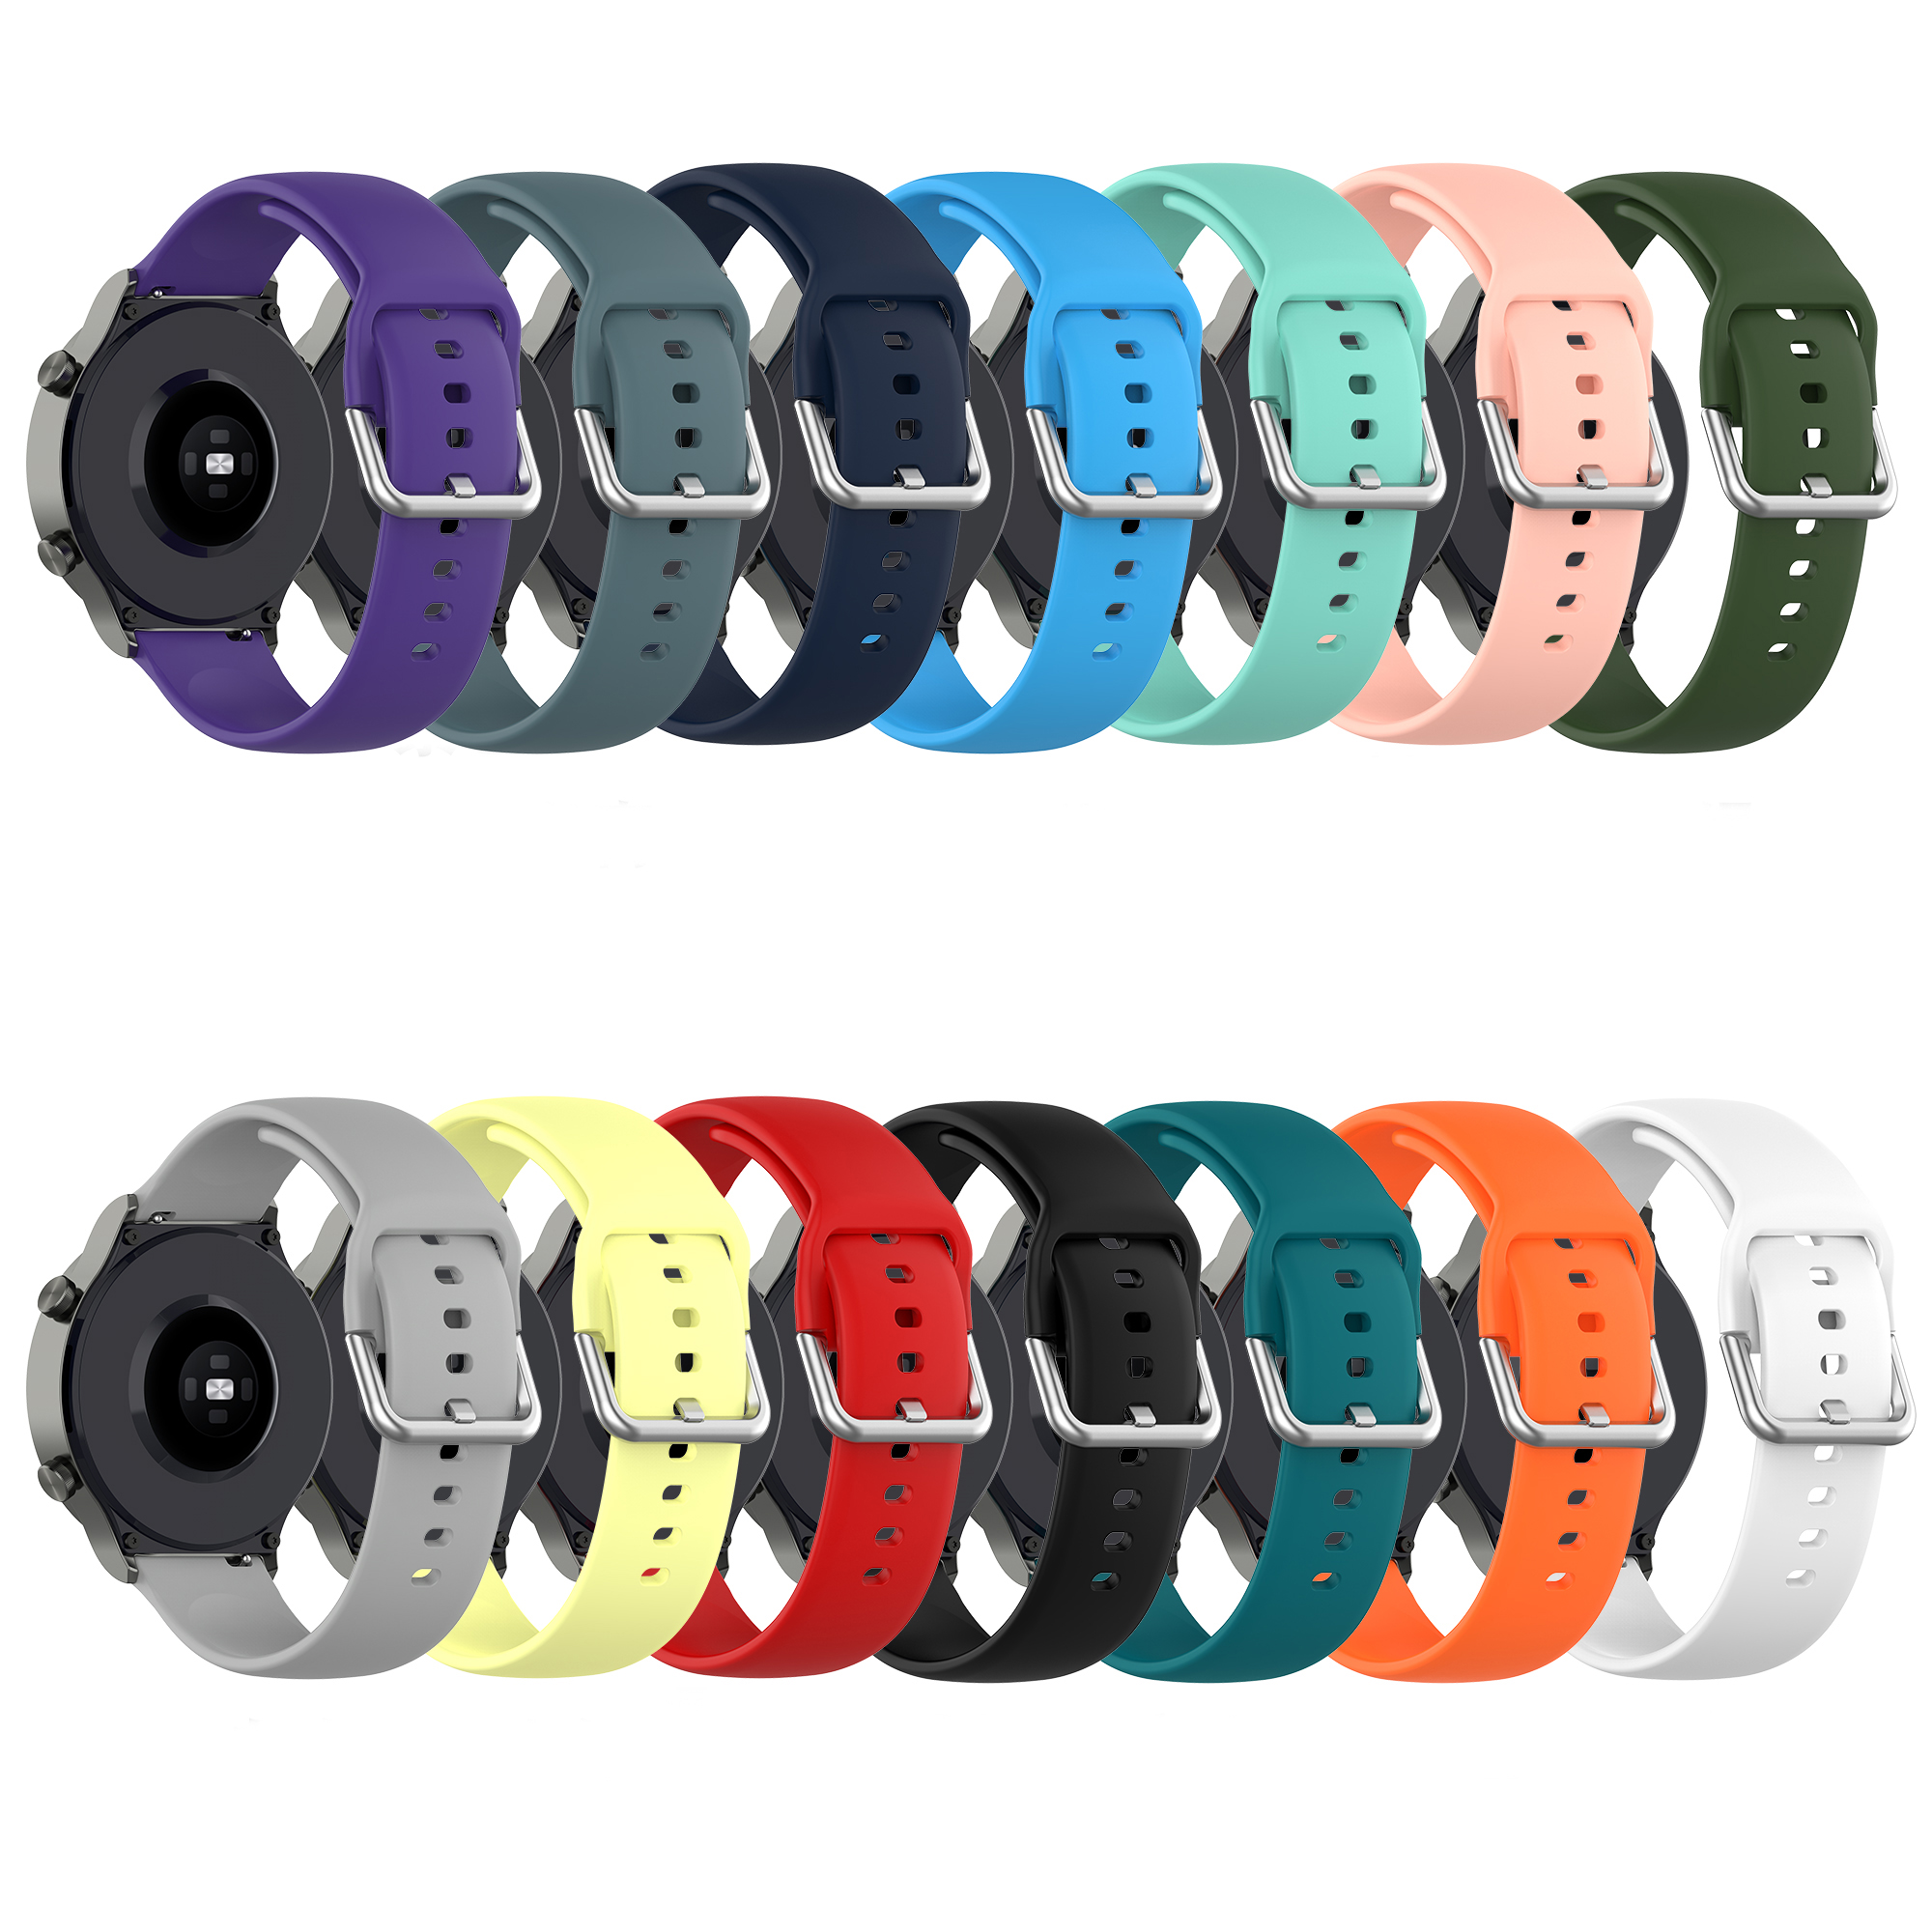 Bakeey-22mm-Multi-color-Silicone-Siver-Buckle-Replacement-Strap-Smart-Watch-Band-For-Huawei-Watch-GT-1768637-2